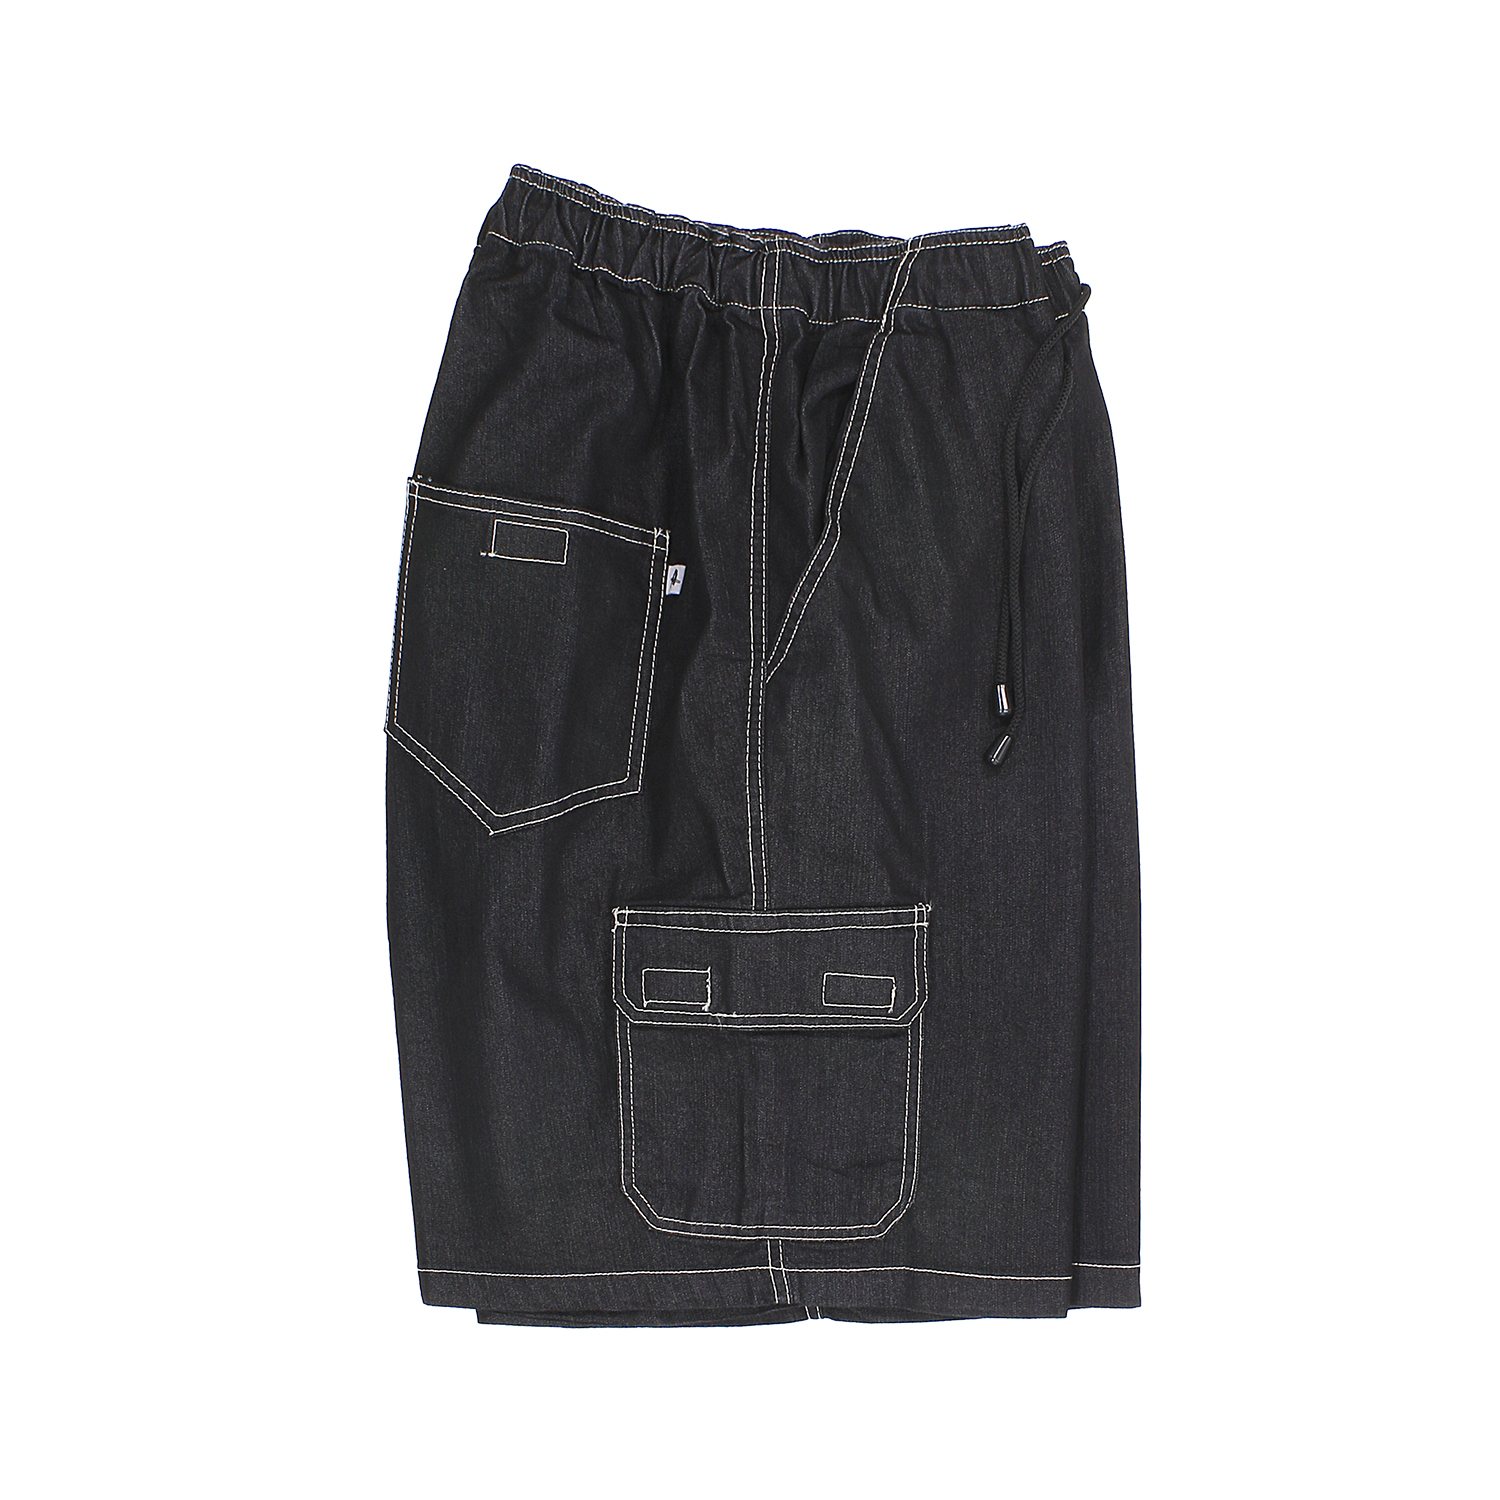 Cargo Jeans Bermuda in black by Abraxas in oversizes up to 10XL